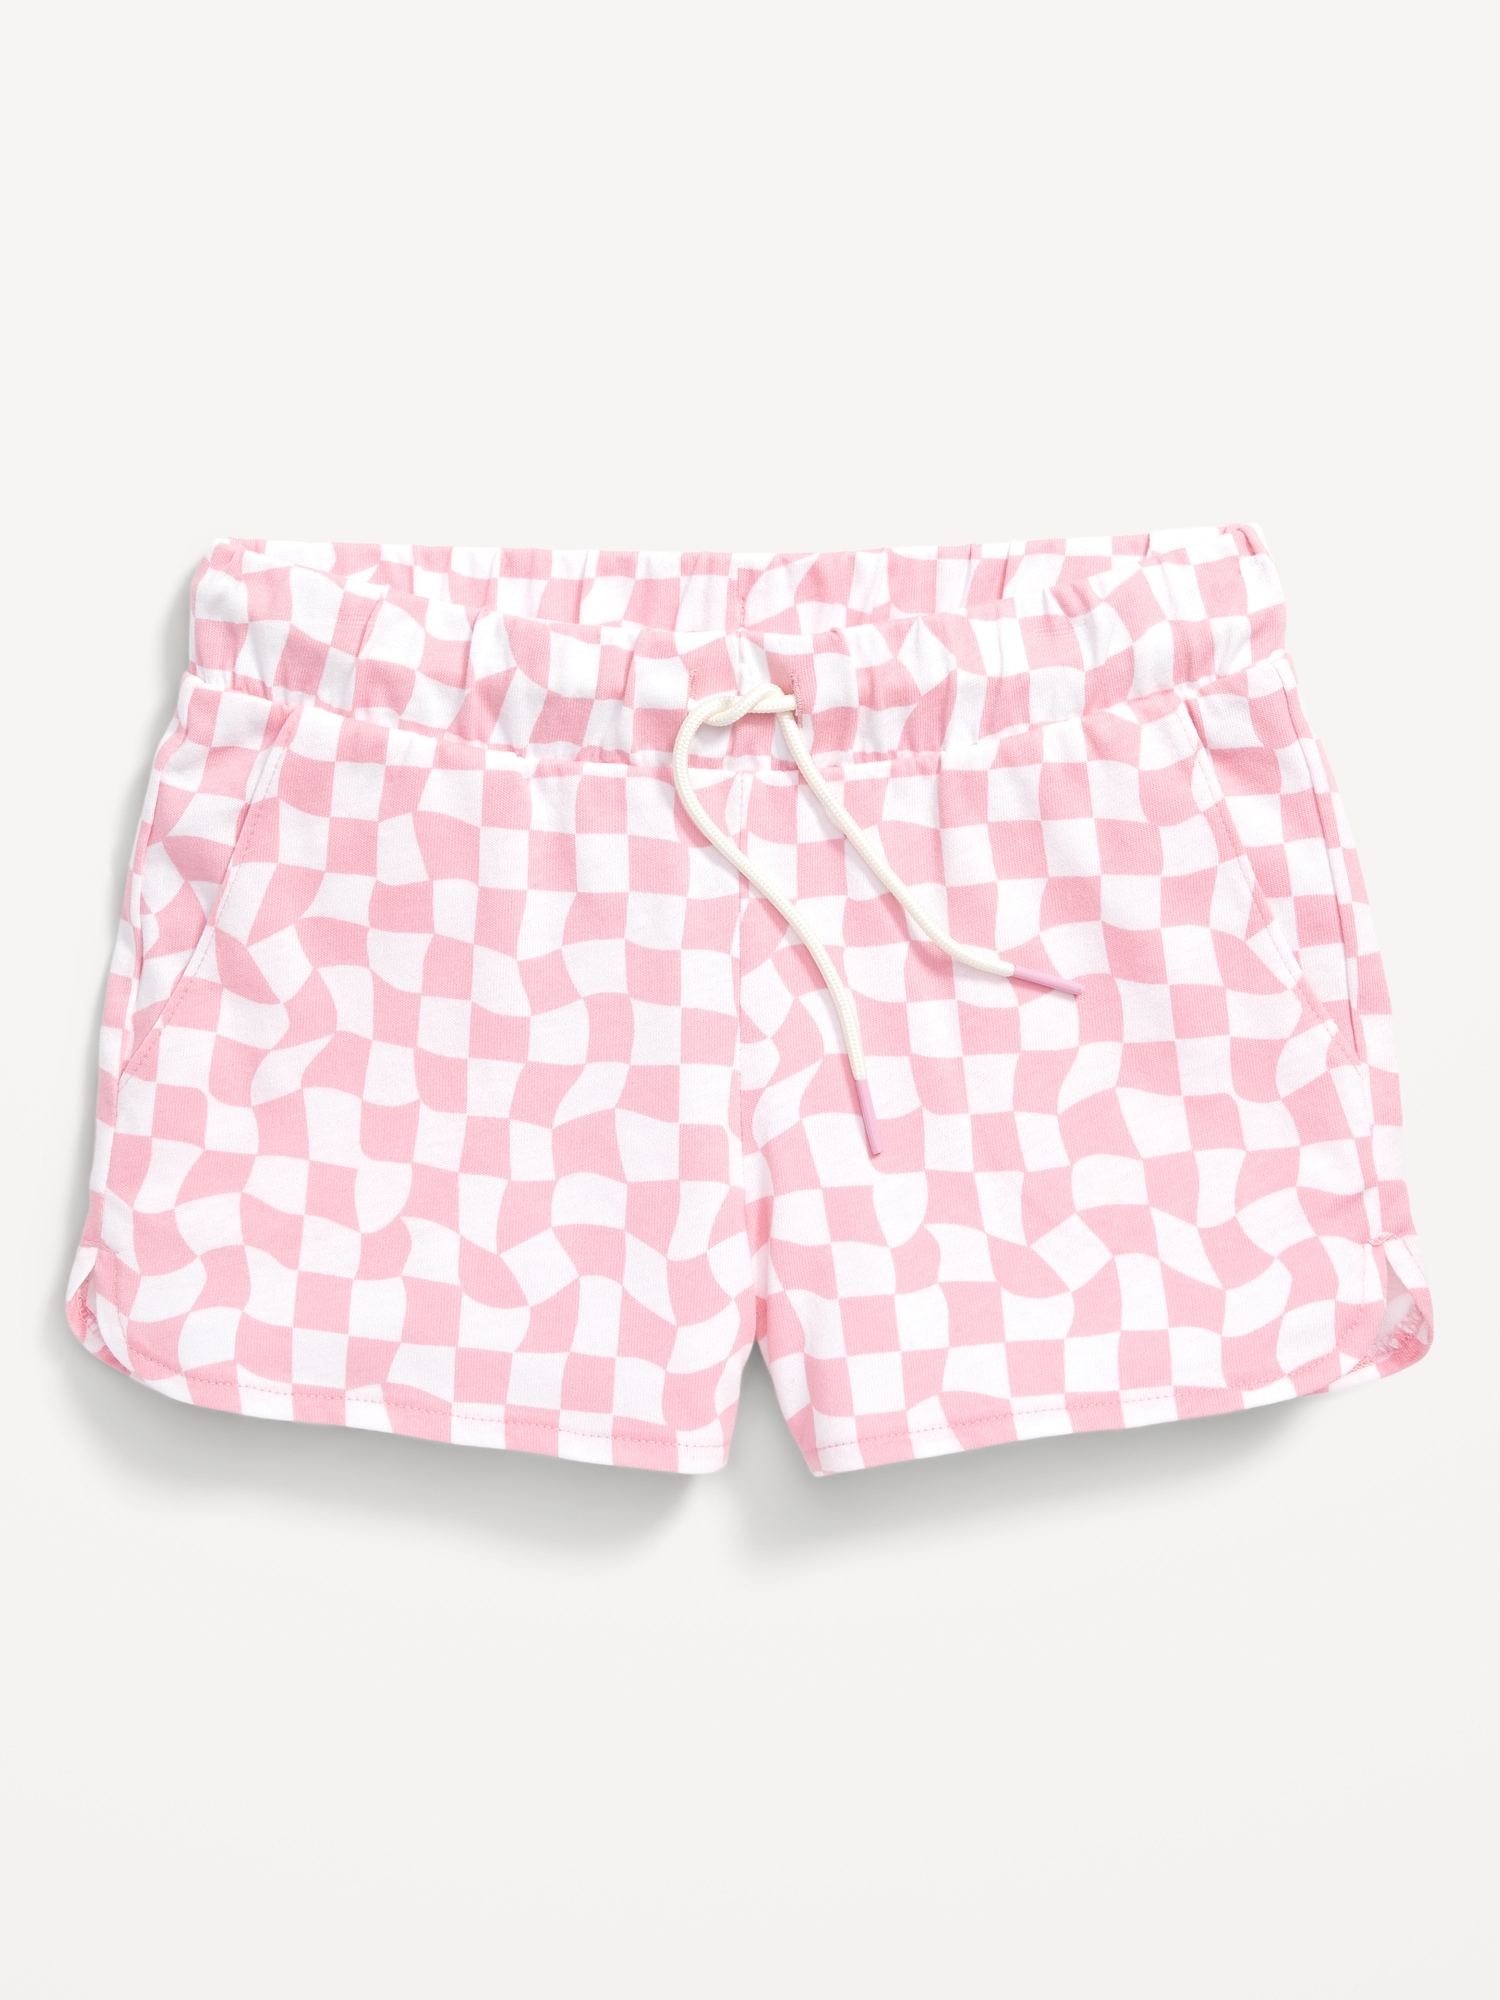 Old Navy Printed Dolphin-Hem Cheer Shorts for Girls pink. 1